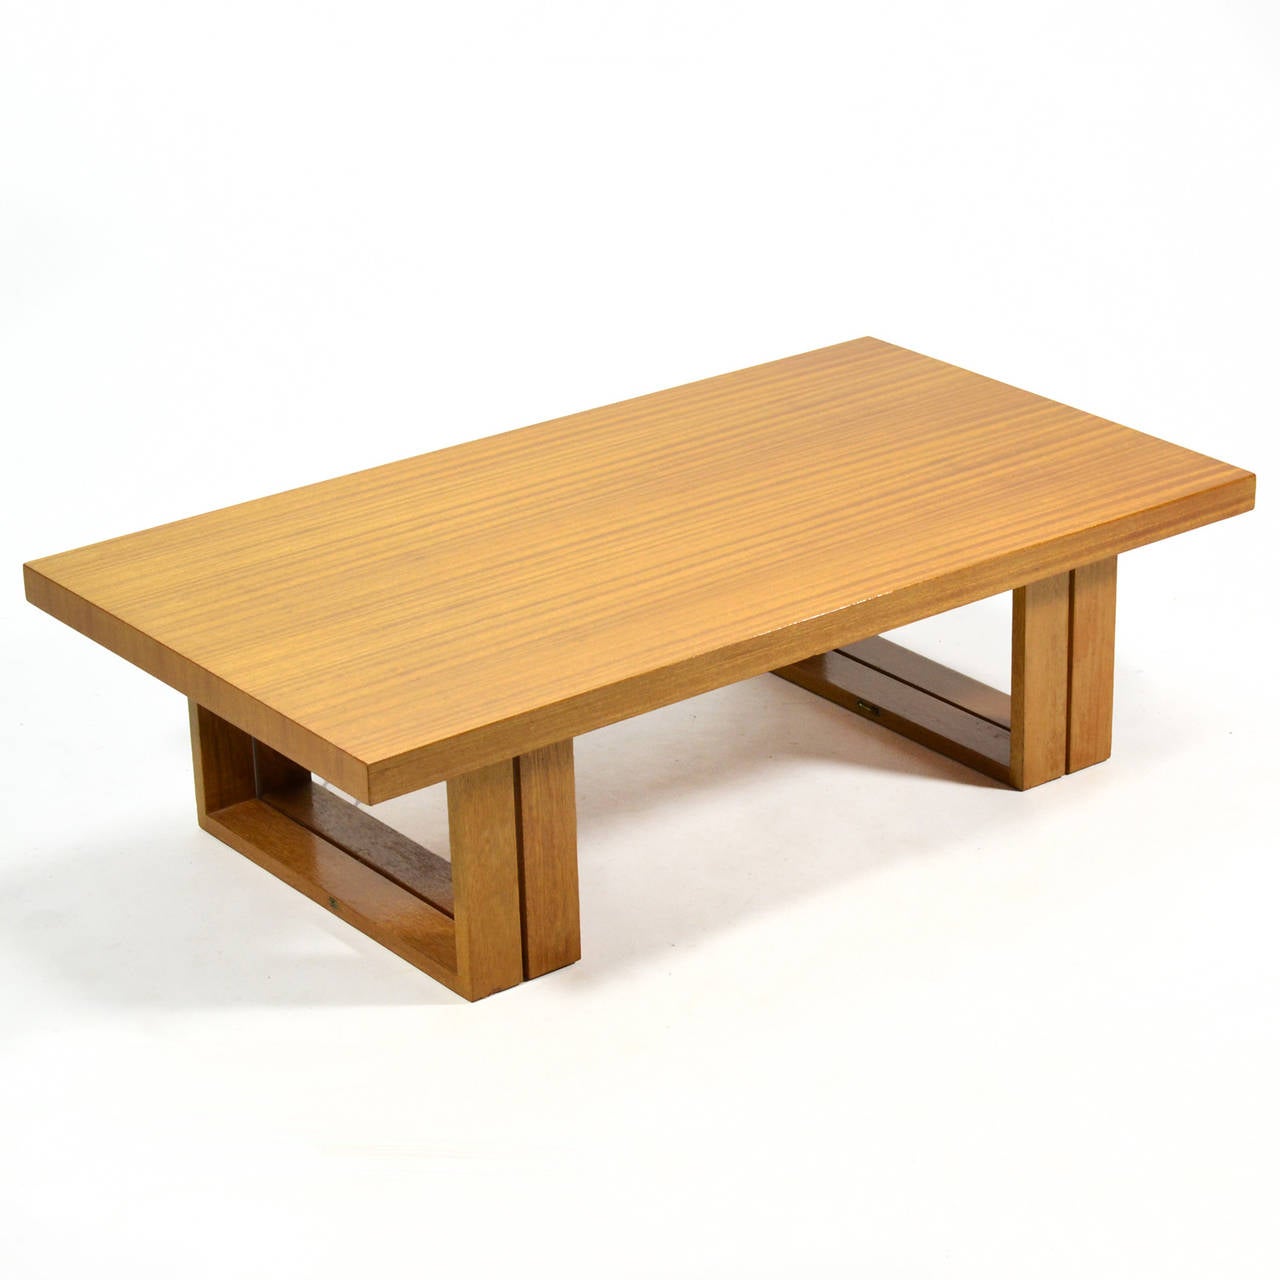 This beautiful and highly functional table designed by Hendrik Van Keppel and Taylor Green can convert from a coffee table to a dining table, work table or desk. The ingenious design features legs which are hinged to fold down and double up when a